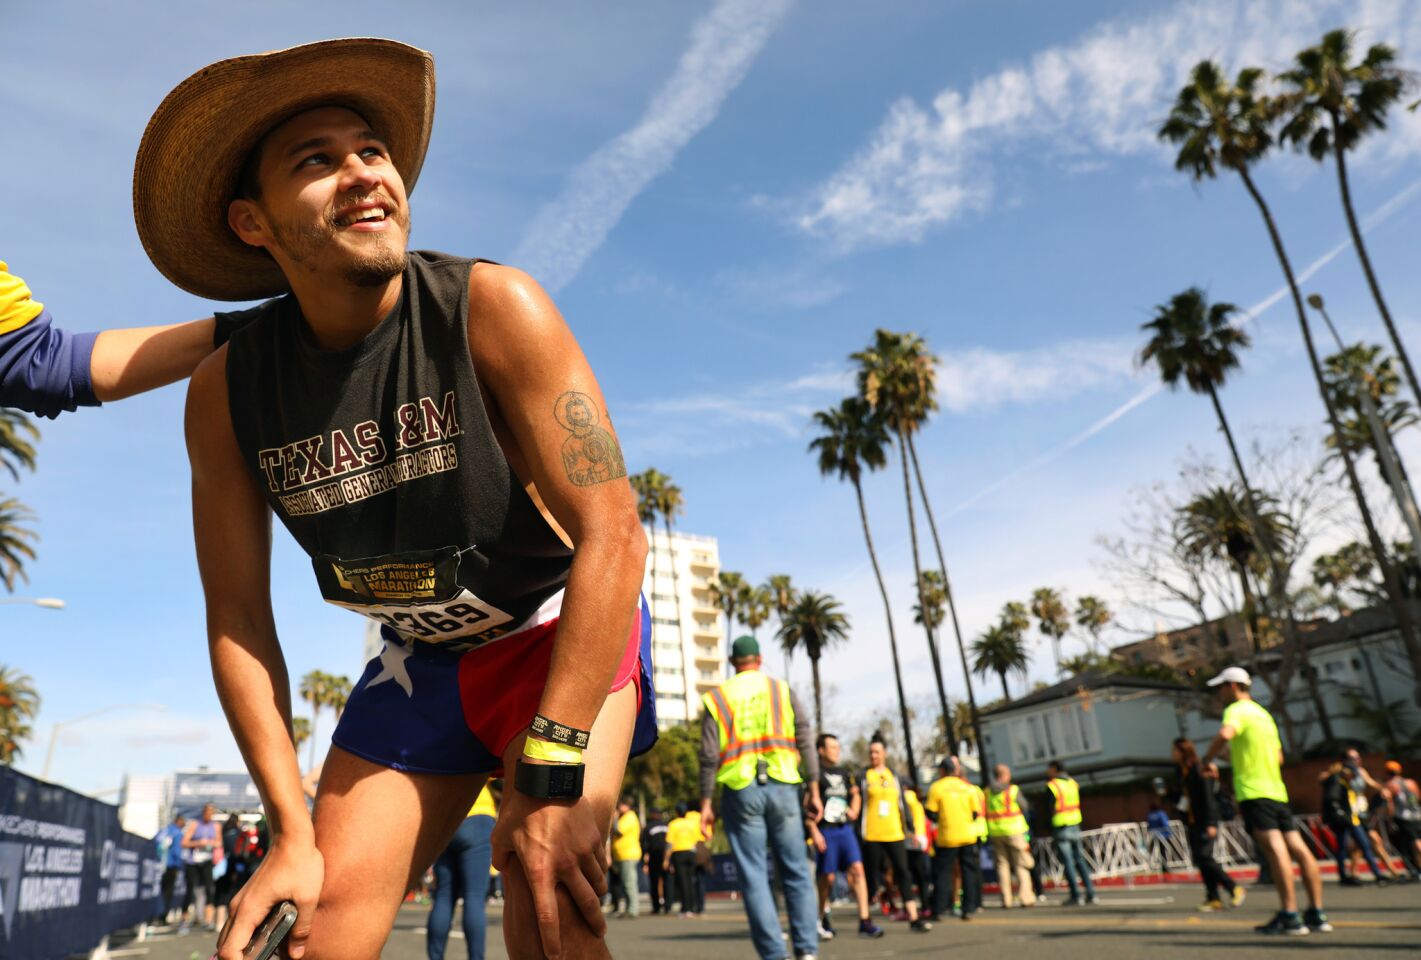 Race participant Jose Lara of Houston, Texas, catches his breath after finishing the L.A. Marathon on Sunday.